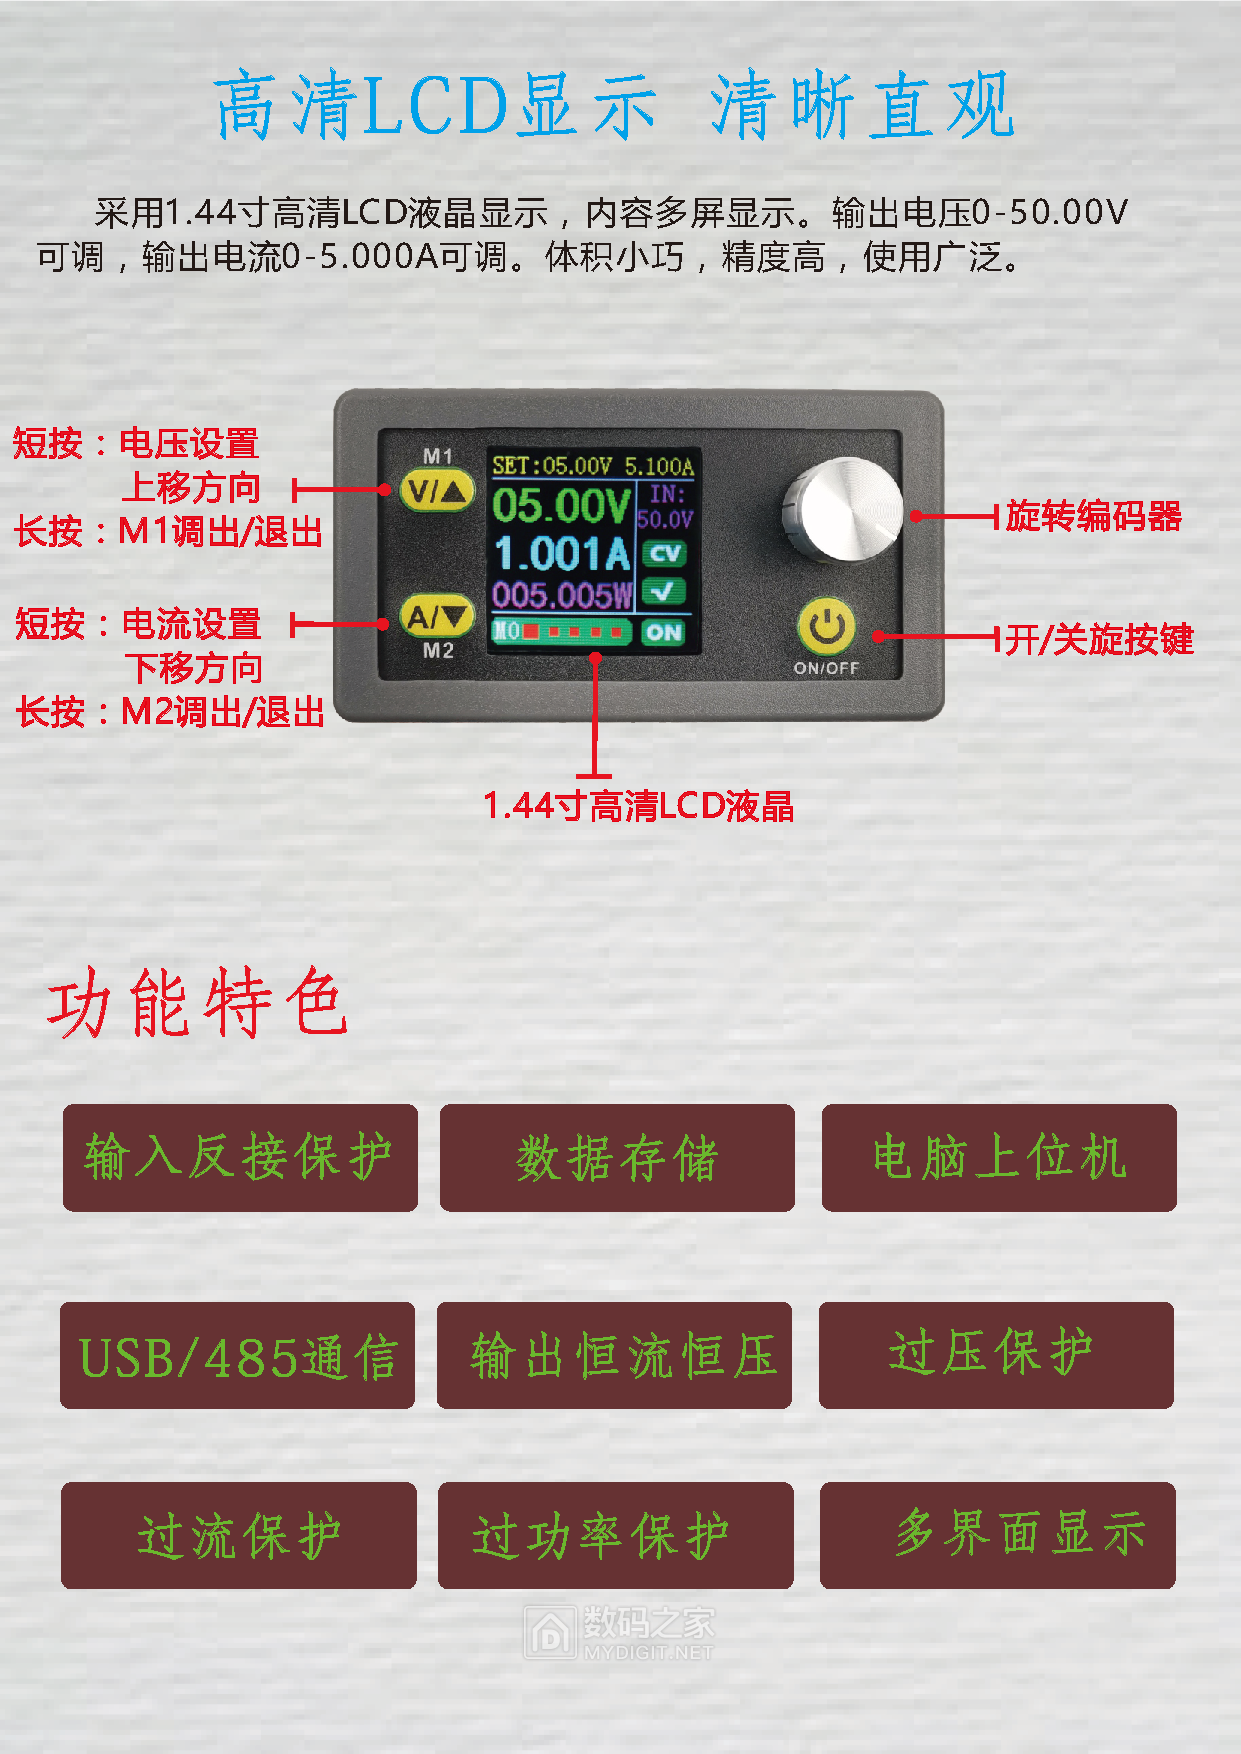 WZ5005E中文说明书_页面_02.png